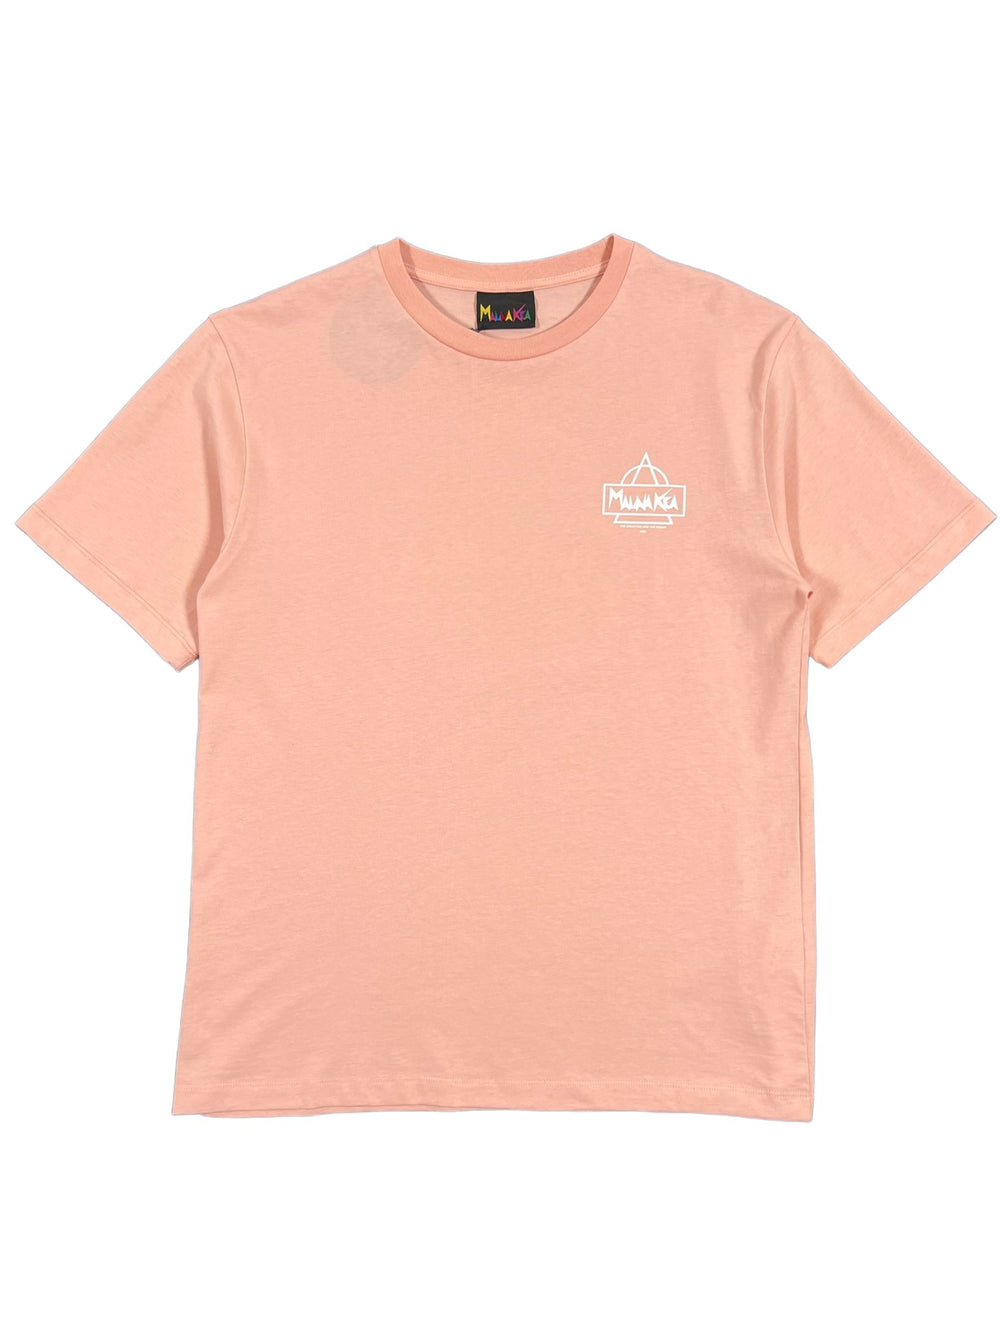 A light pink, 100% cotton short-sleeve t-shirt with a small white Maunakea graphic logo on the left chest *is actually the* MAUNA-KEA MAUNA-KEA MKE100-04 HERITAGE TEE W SCREEN PRINT PINK.